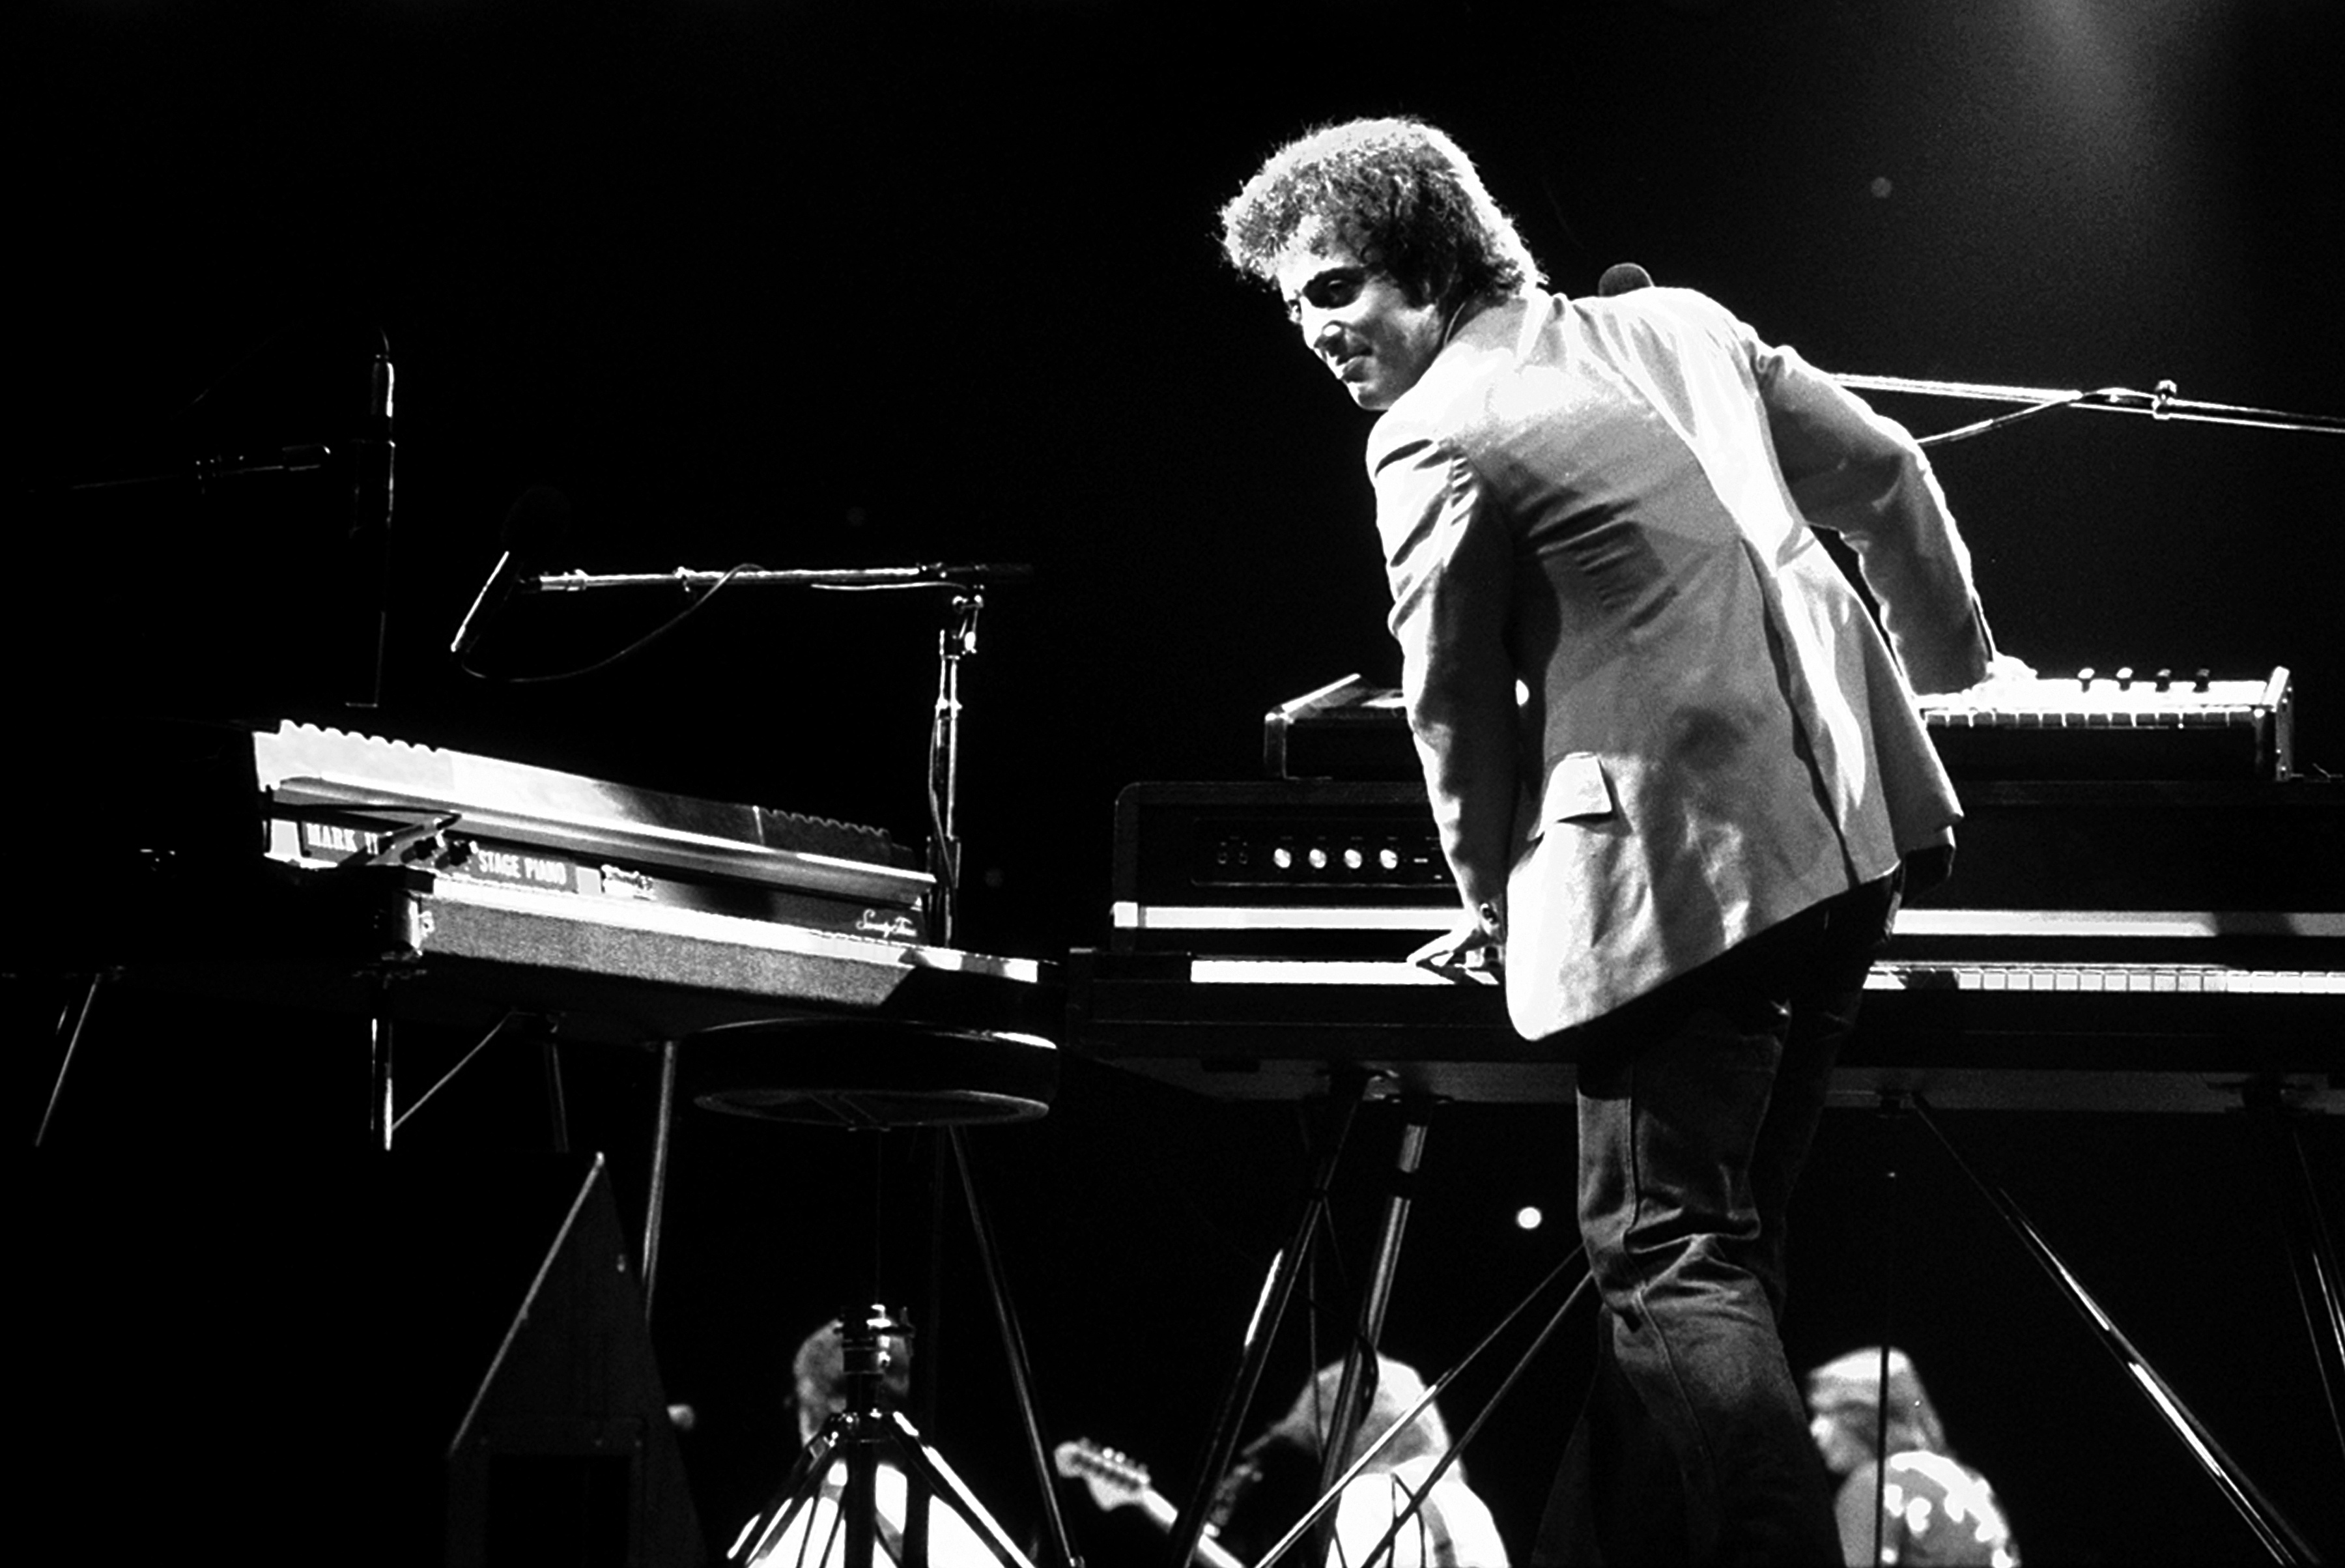 Billy Joel performs on stage in 1980